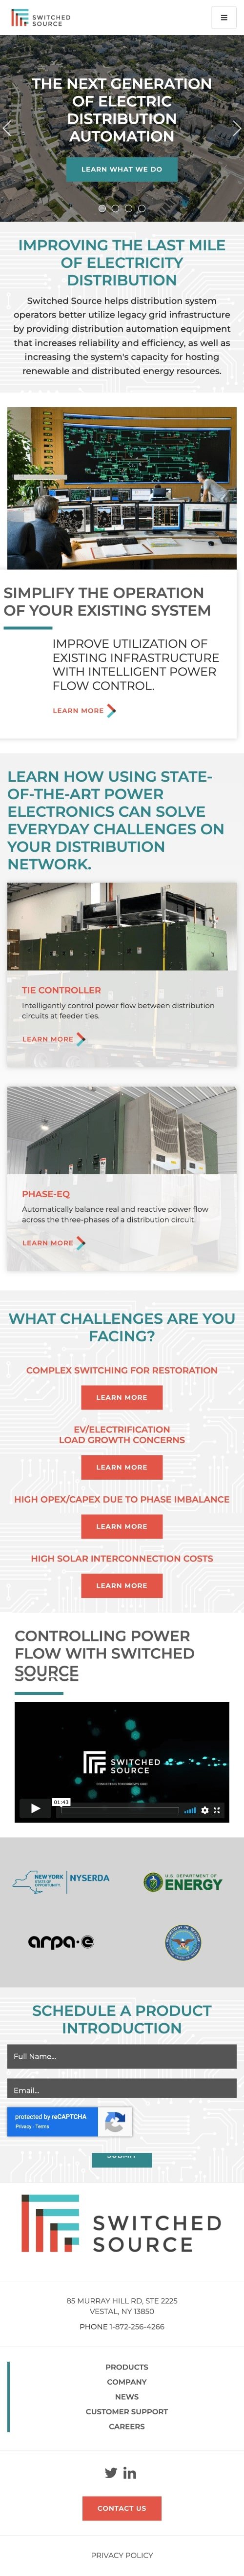 Switched Source Website - Mobile